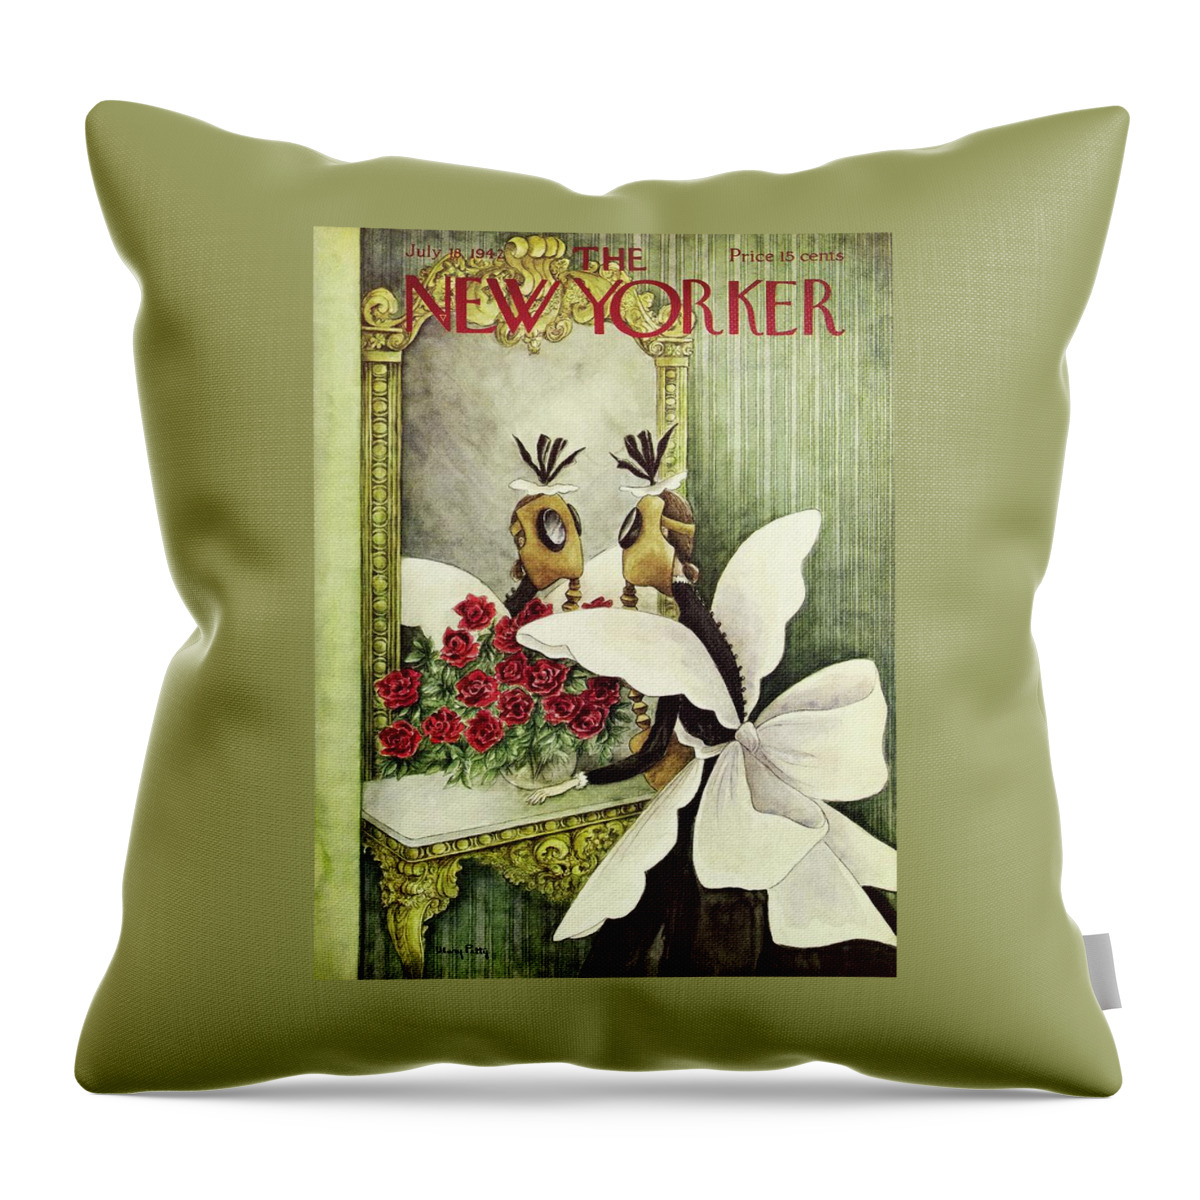 New Yorker July 18 1942 Throw Pillow